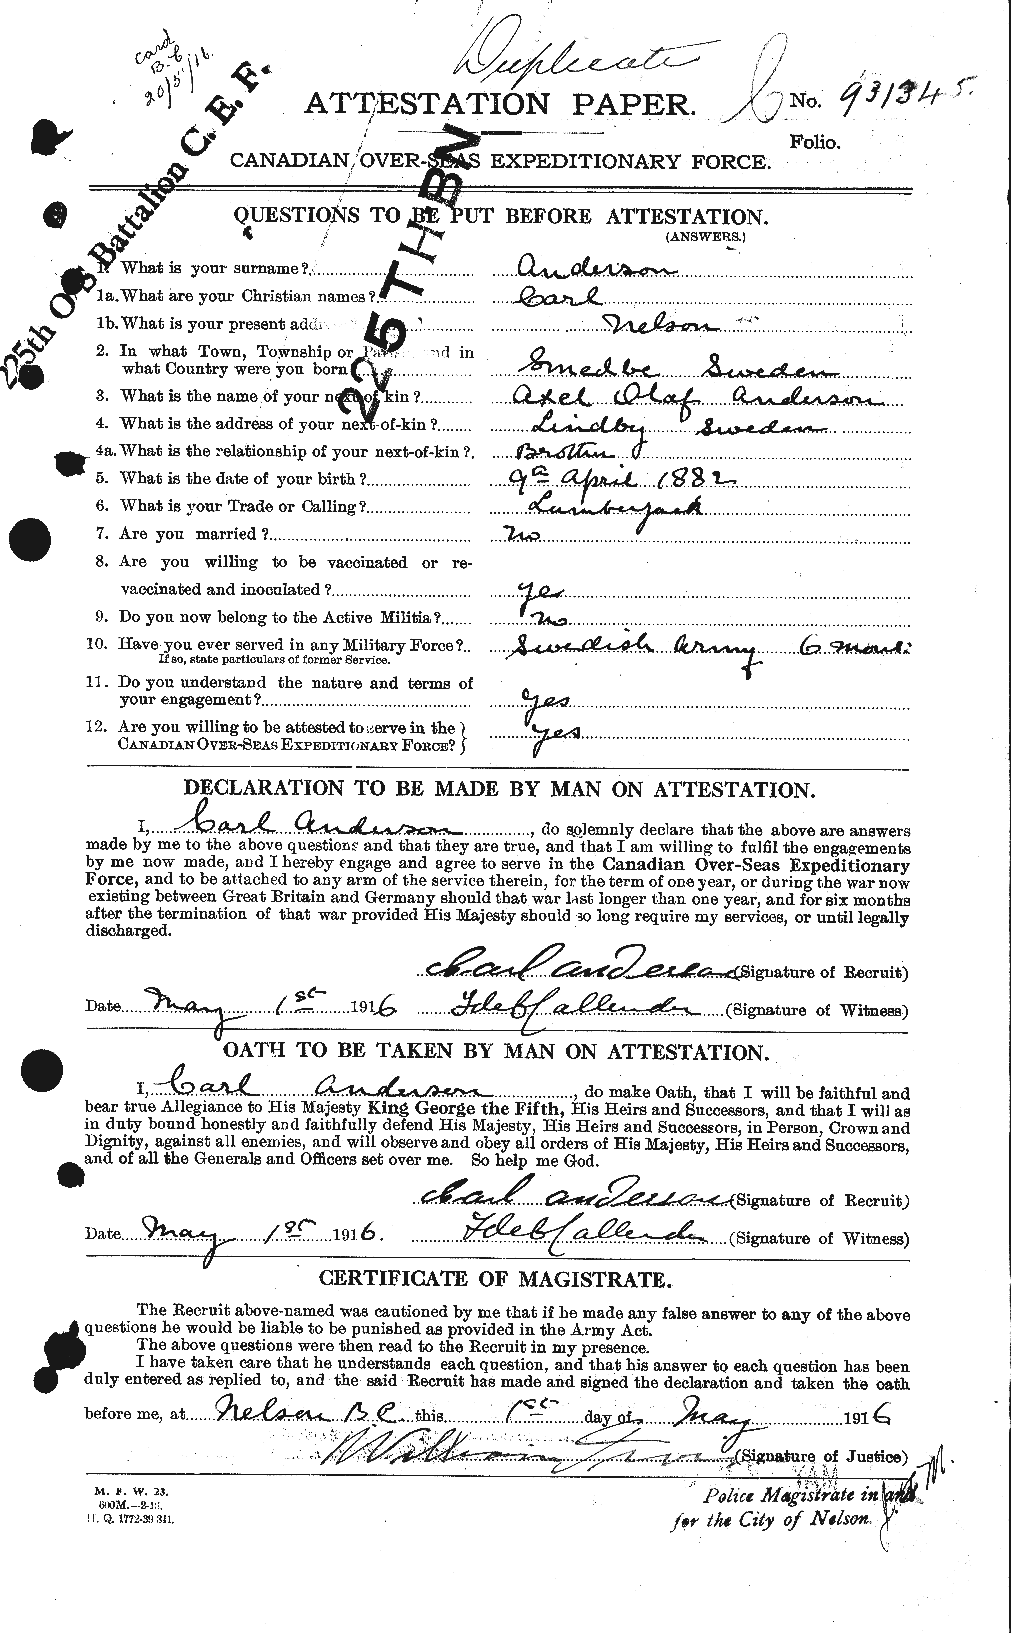 Personnel Records of the First World War - CEF 209286a